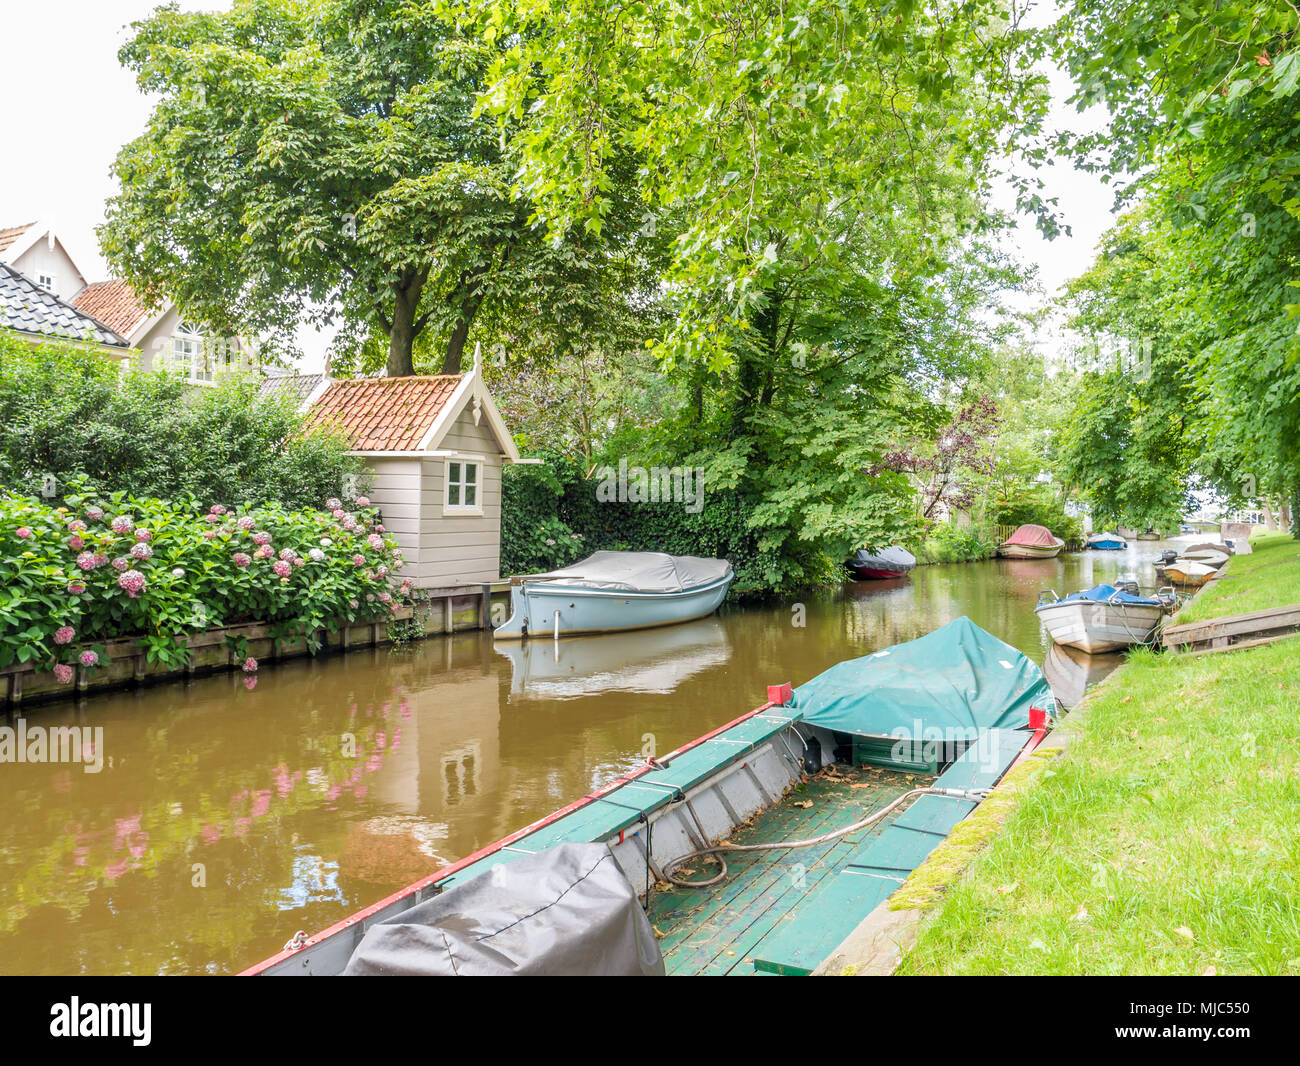 Dee canal with boats in old village of Broek in Waterland north of Amsterdam, Noord-Holland, Netherlands Stock Photo